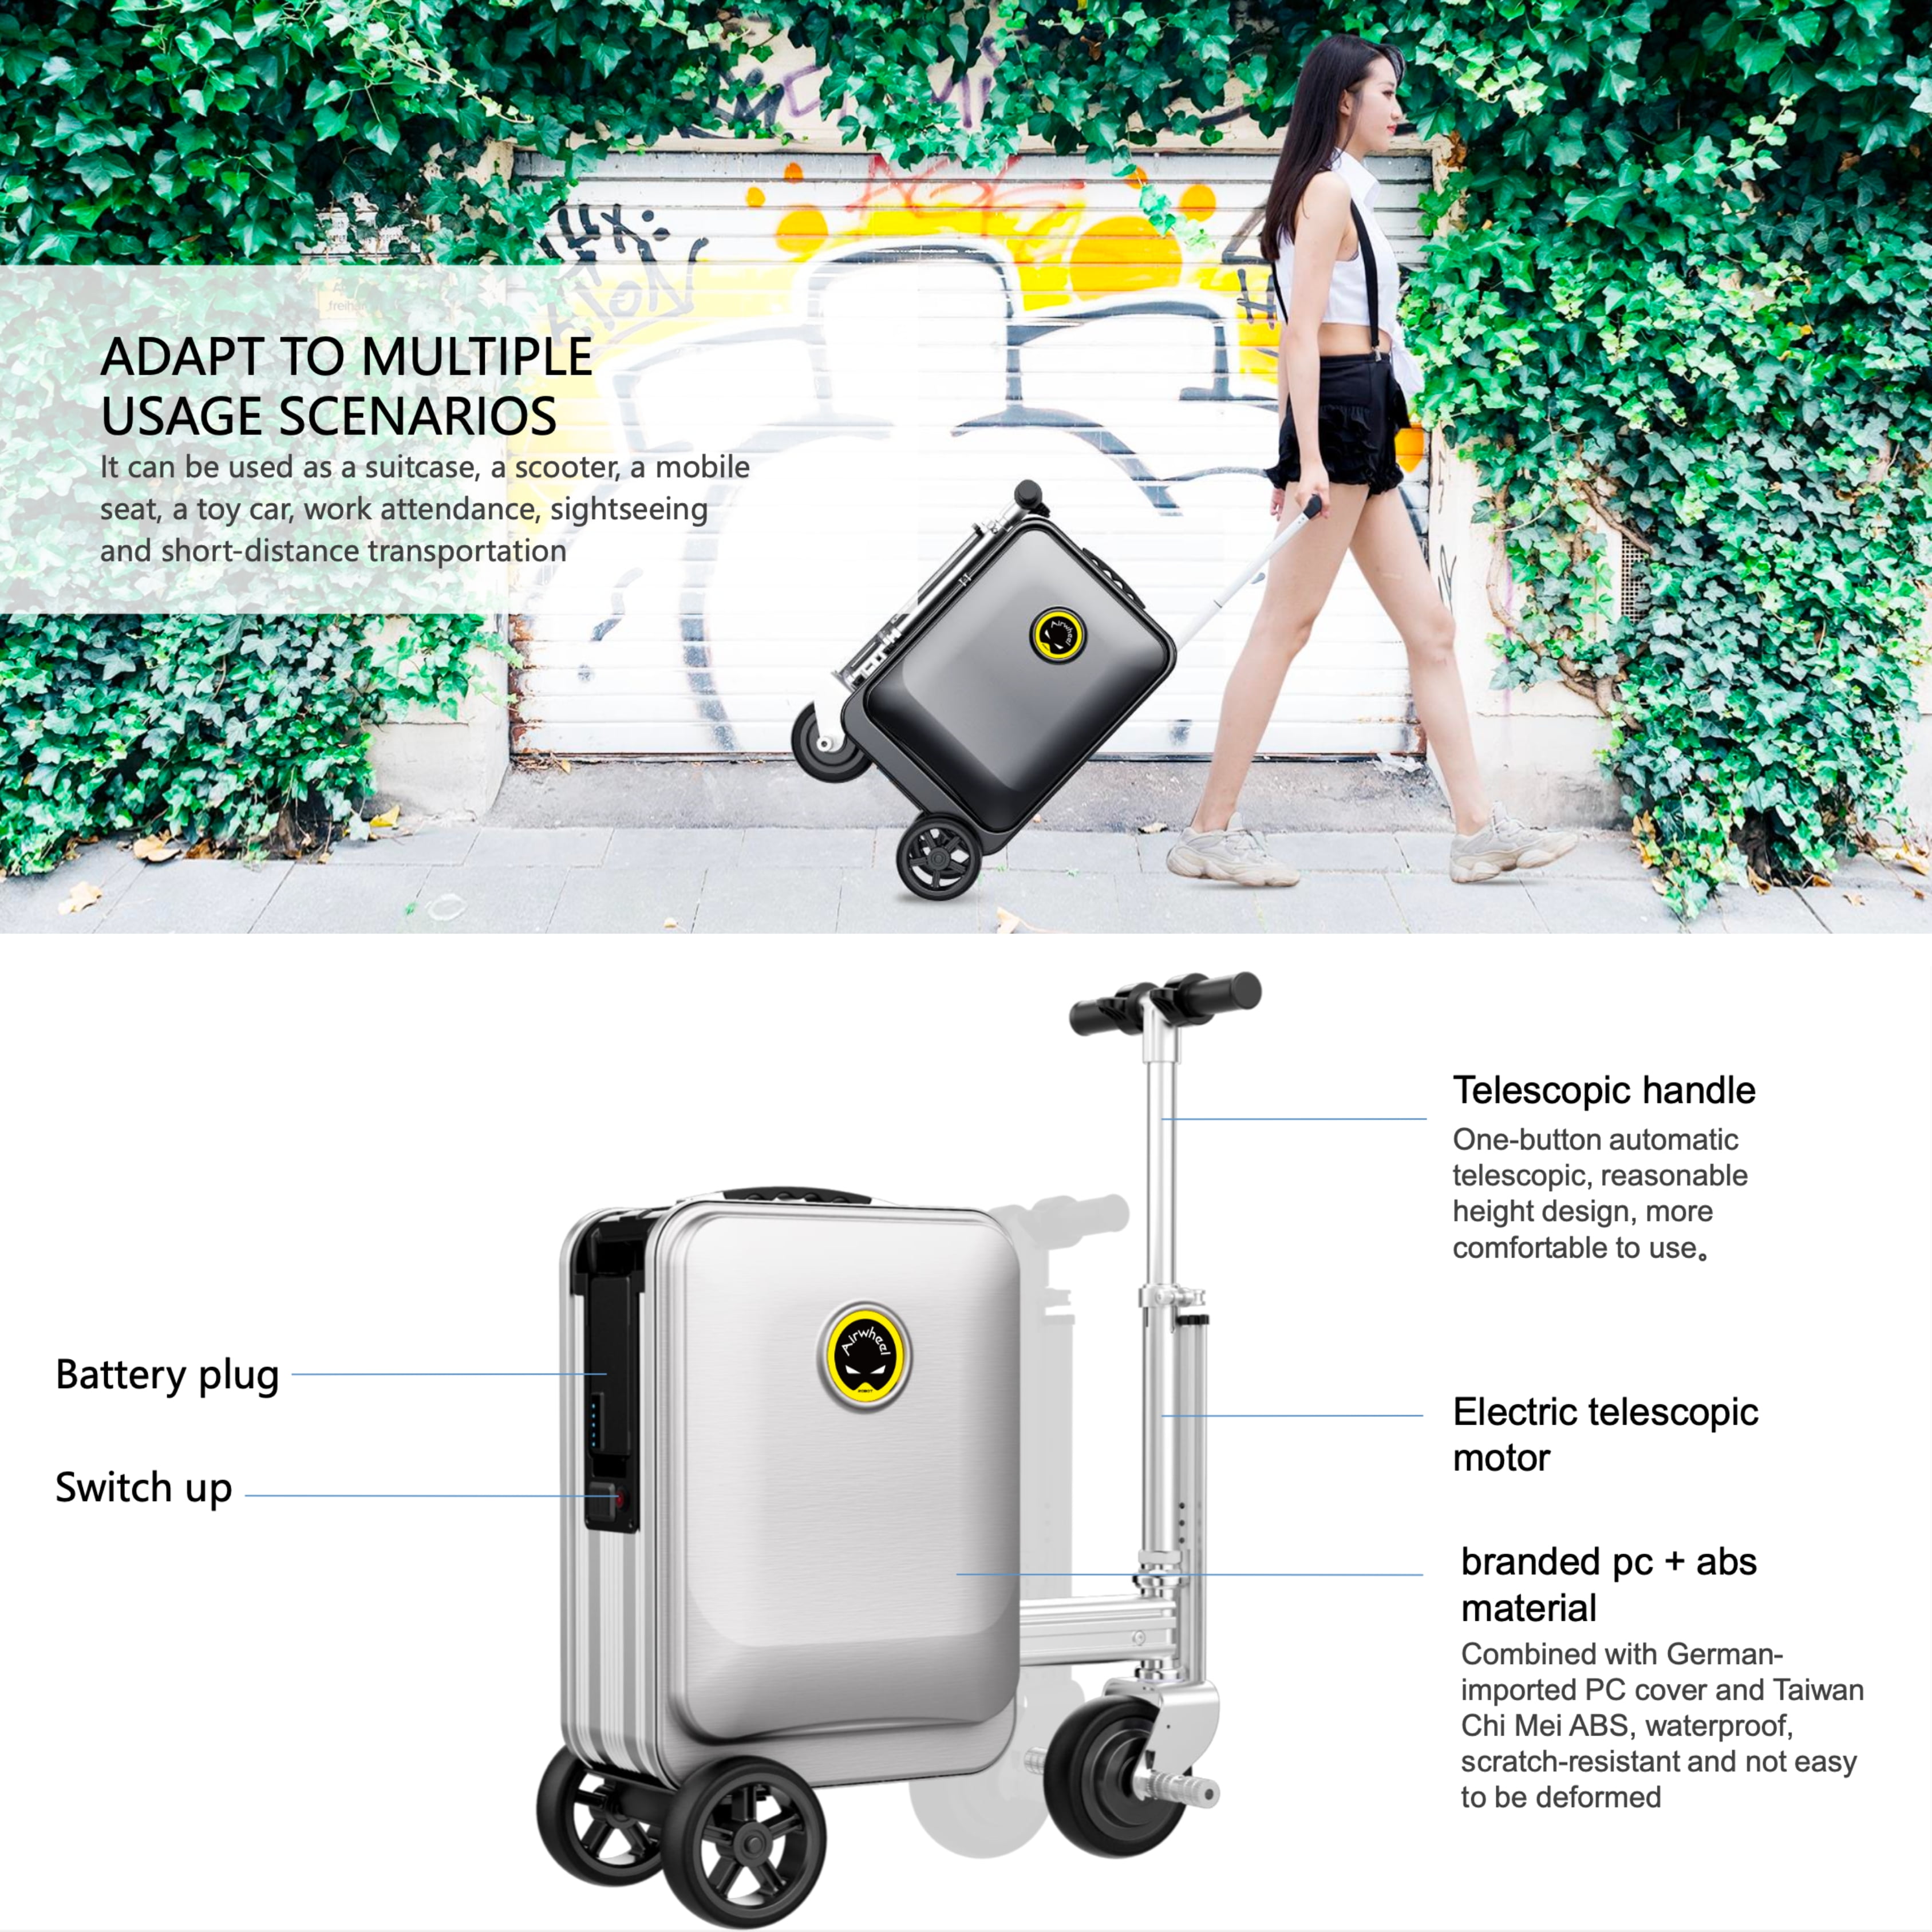 Airwheel SE3S Electric Mini Smart Black Scooter Luggage 20 Inch Riding  Suitcase